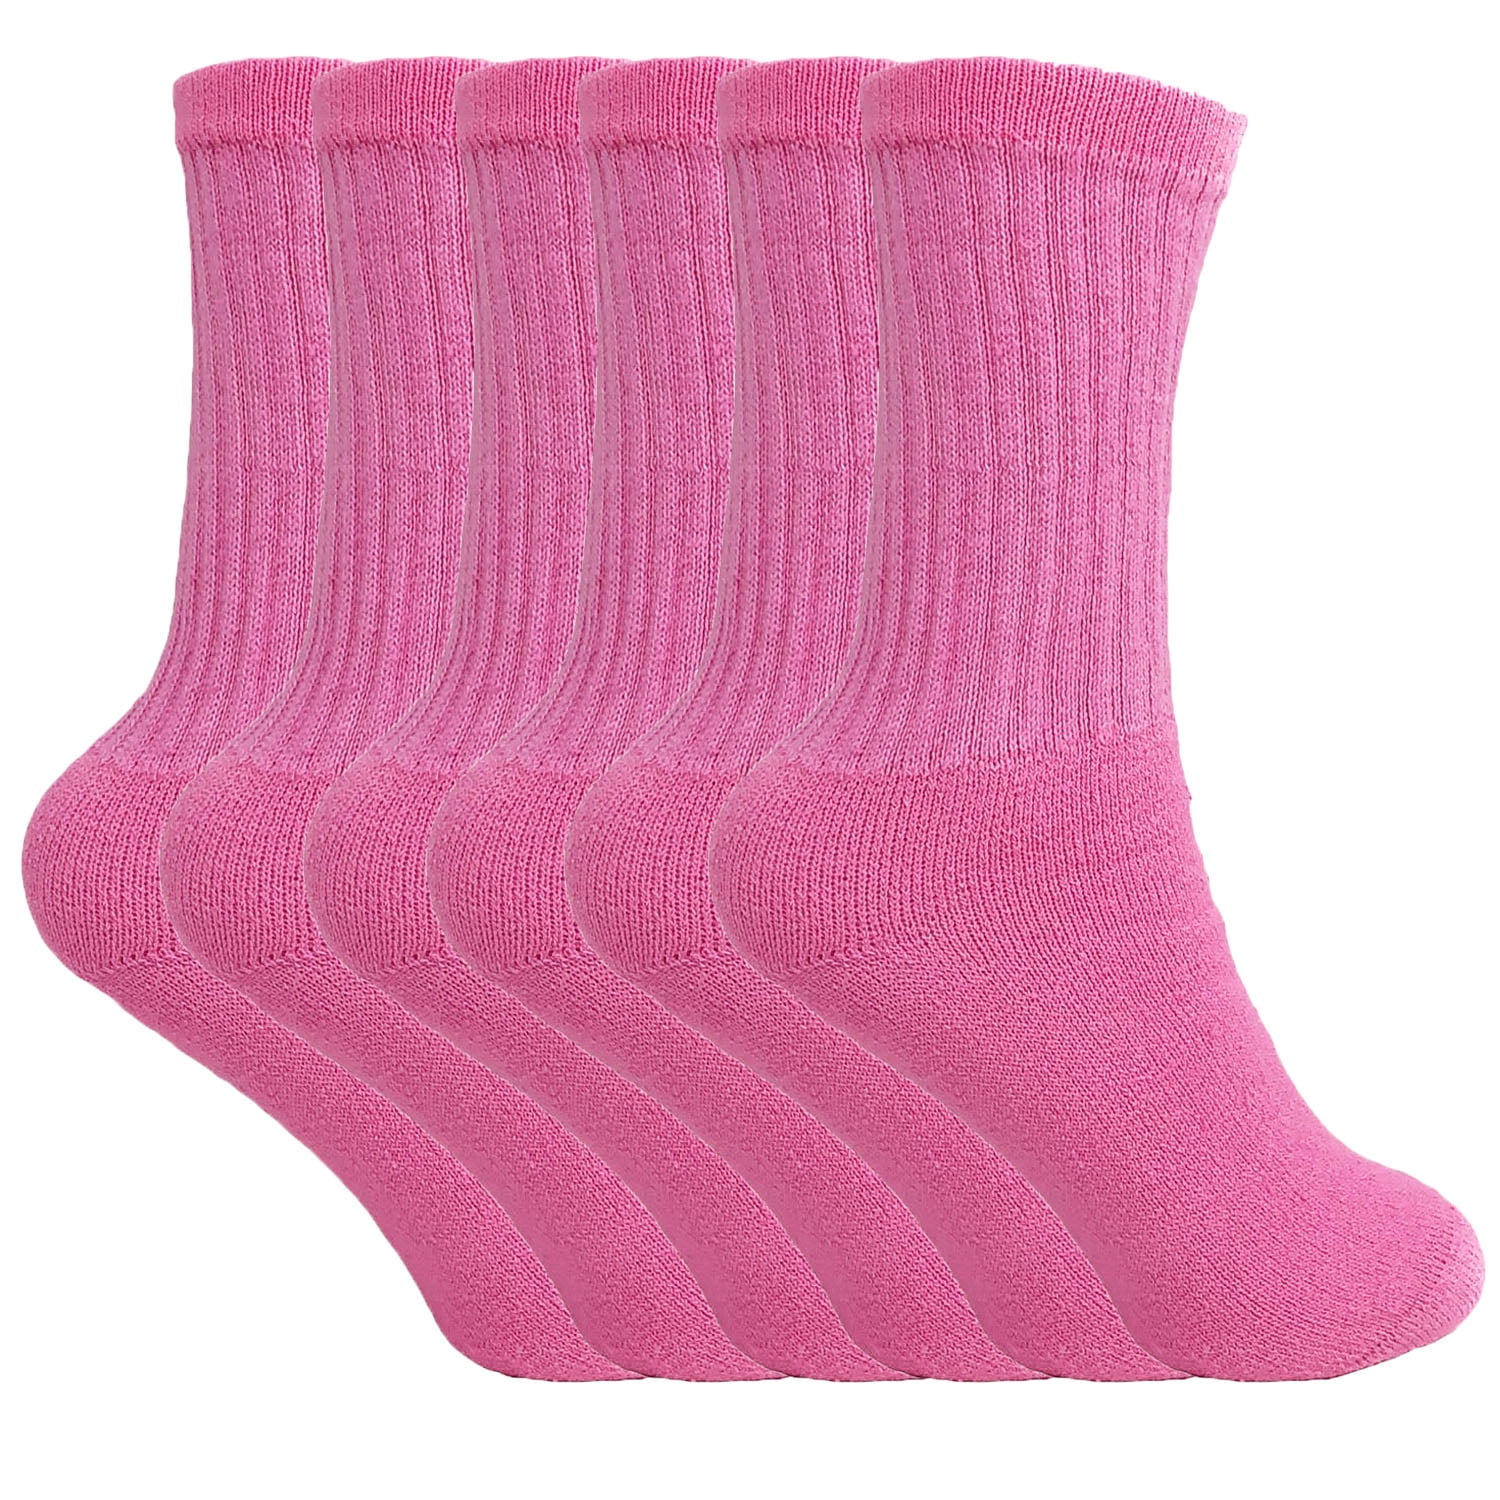 Cotton Crew Socks For Women Pink 6 Pairs Size 10 13